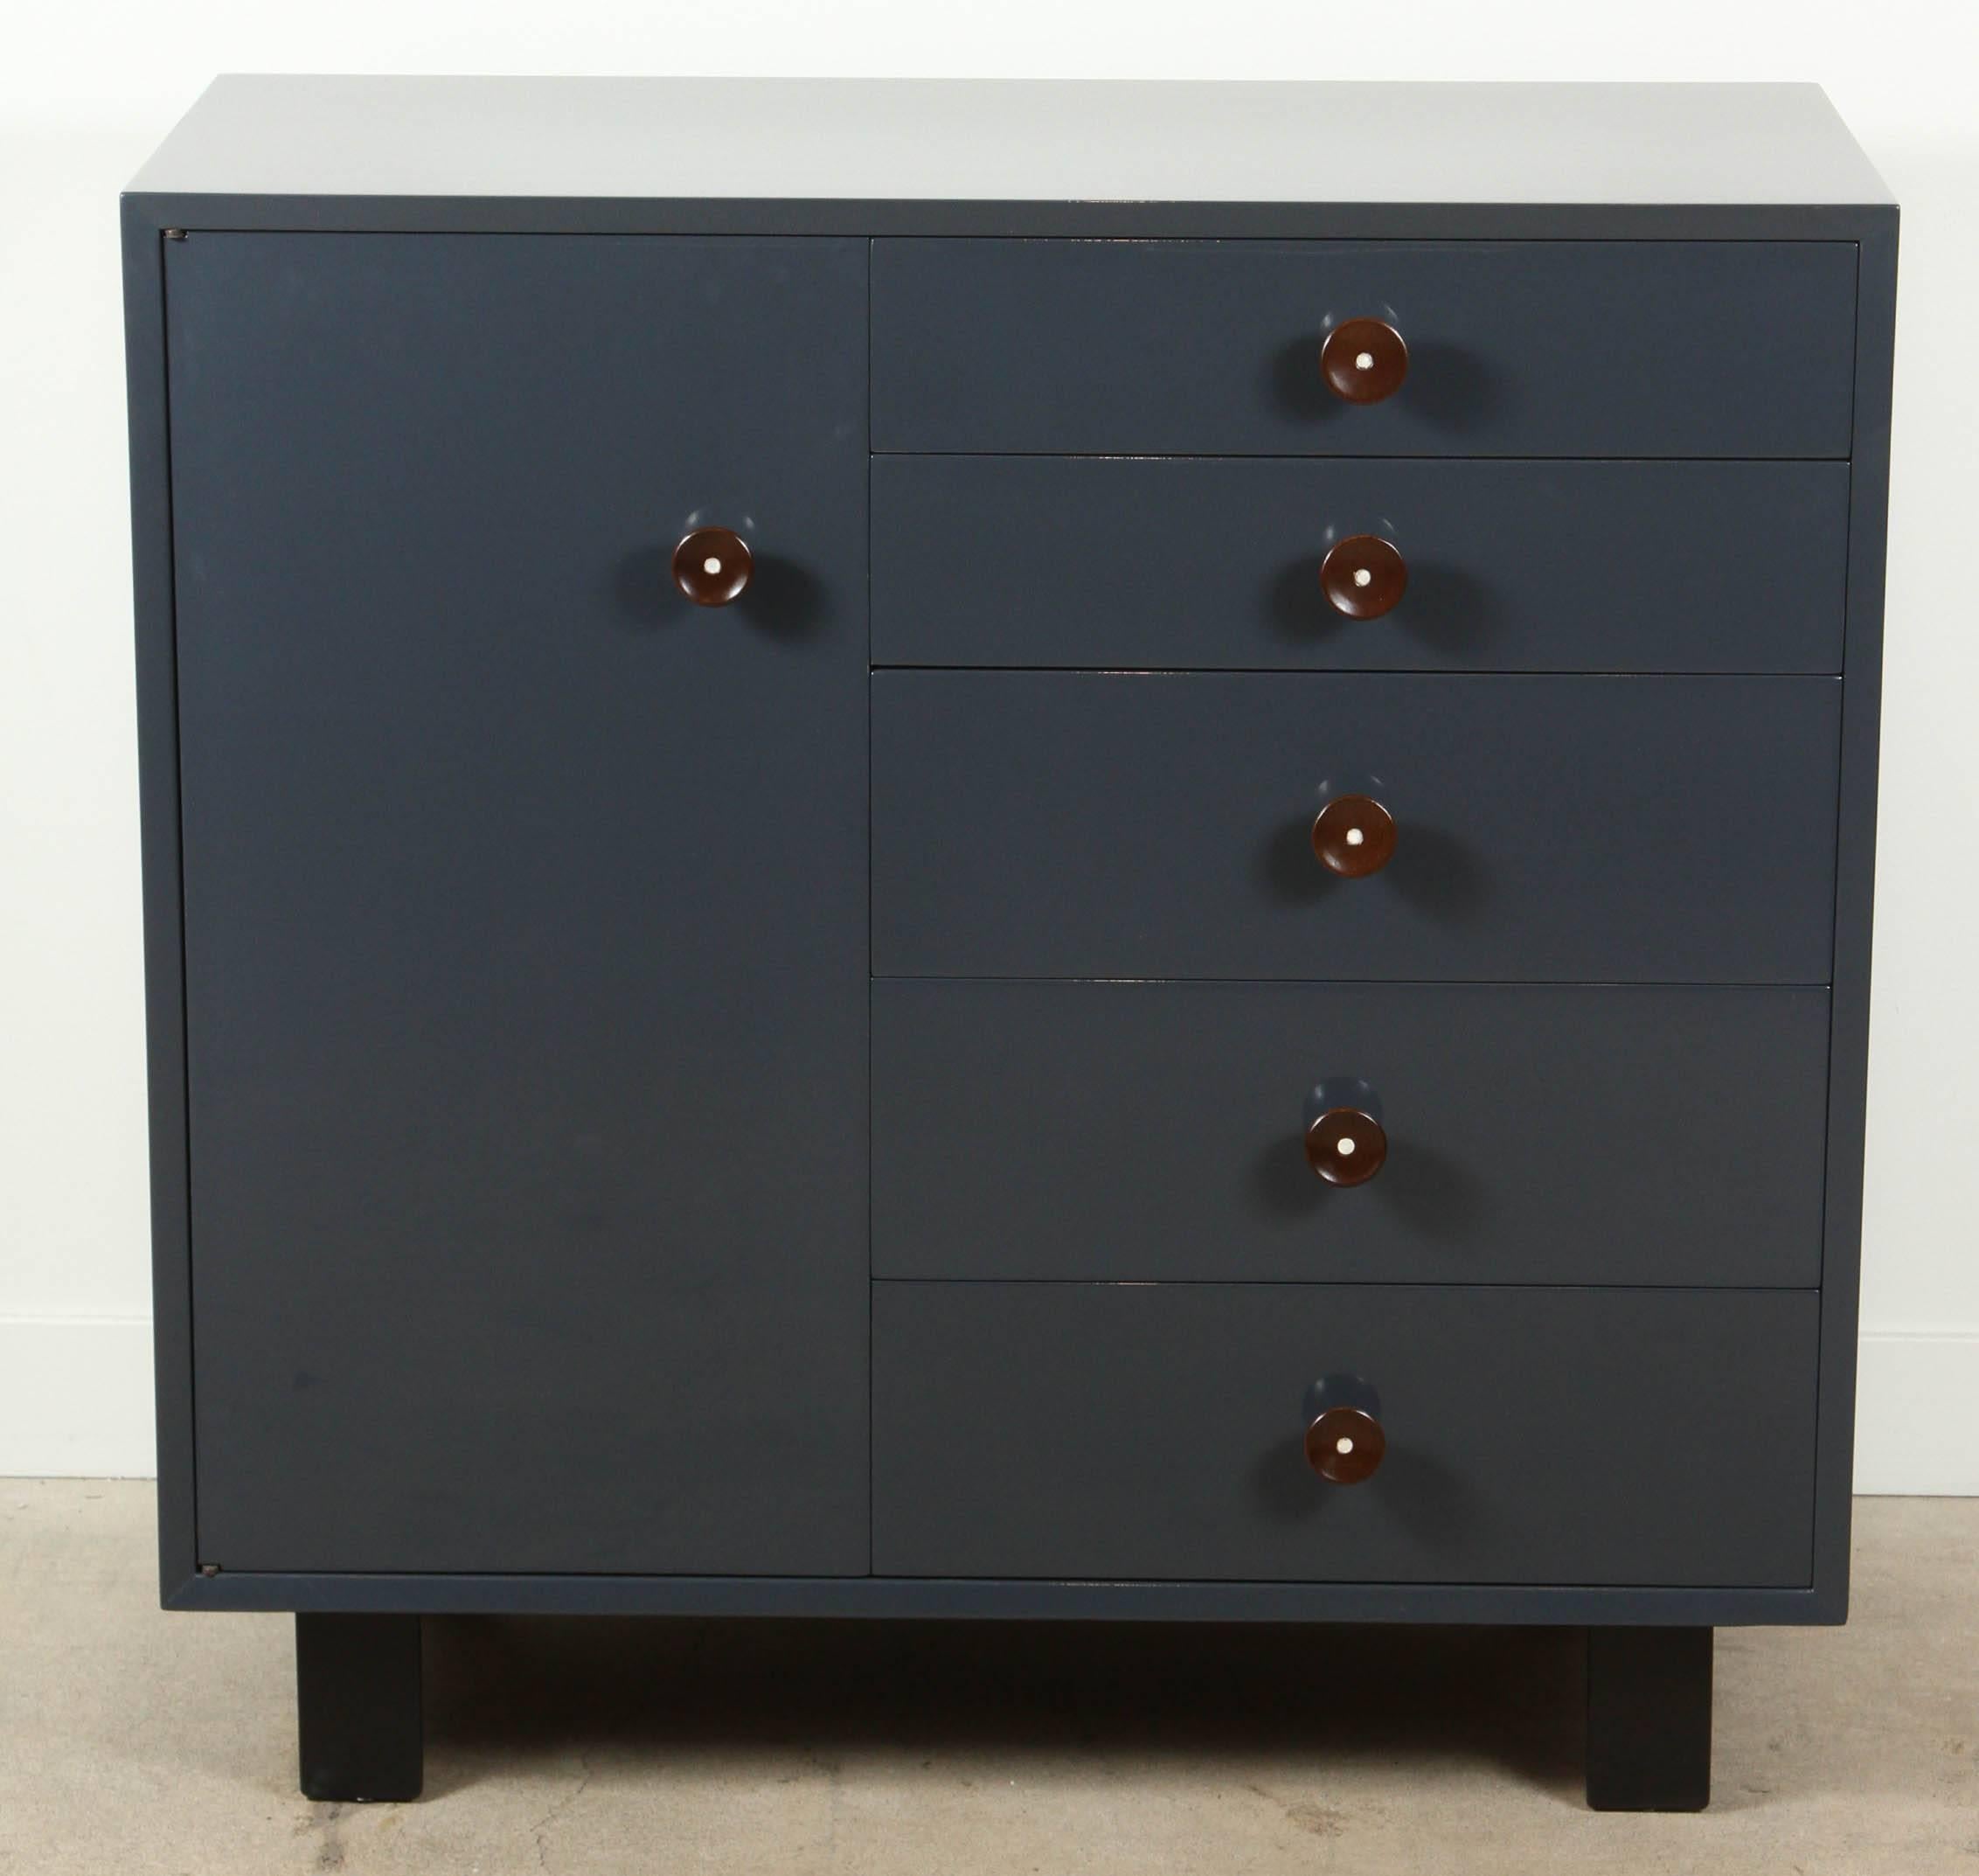 Lacquered cabinet by George Nelson for Herman Miller. Matching dresser available as well.